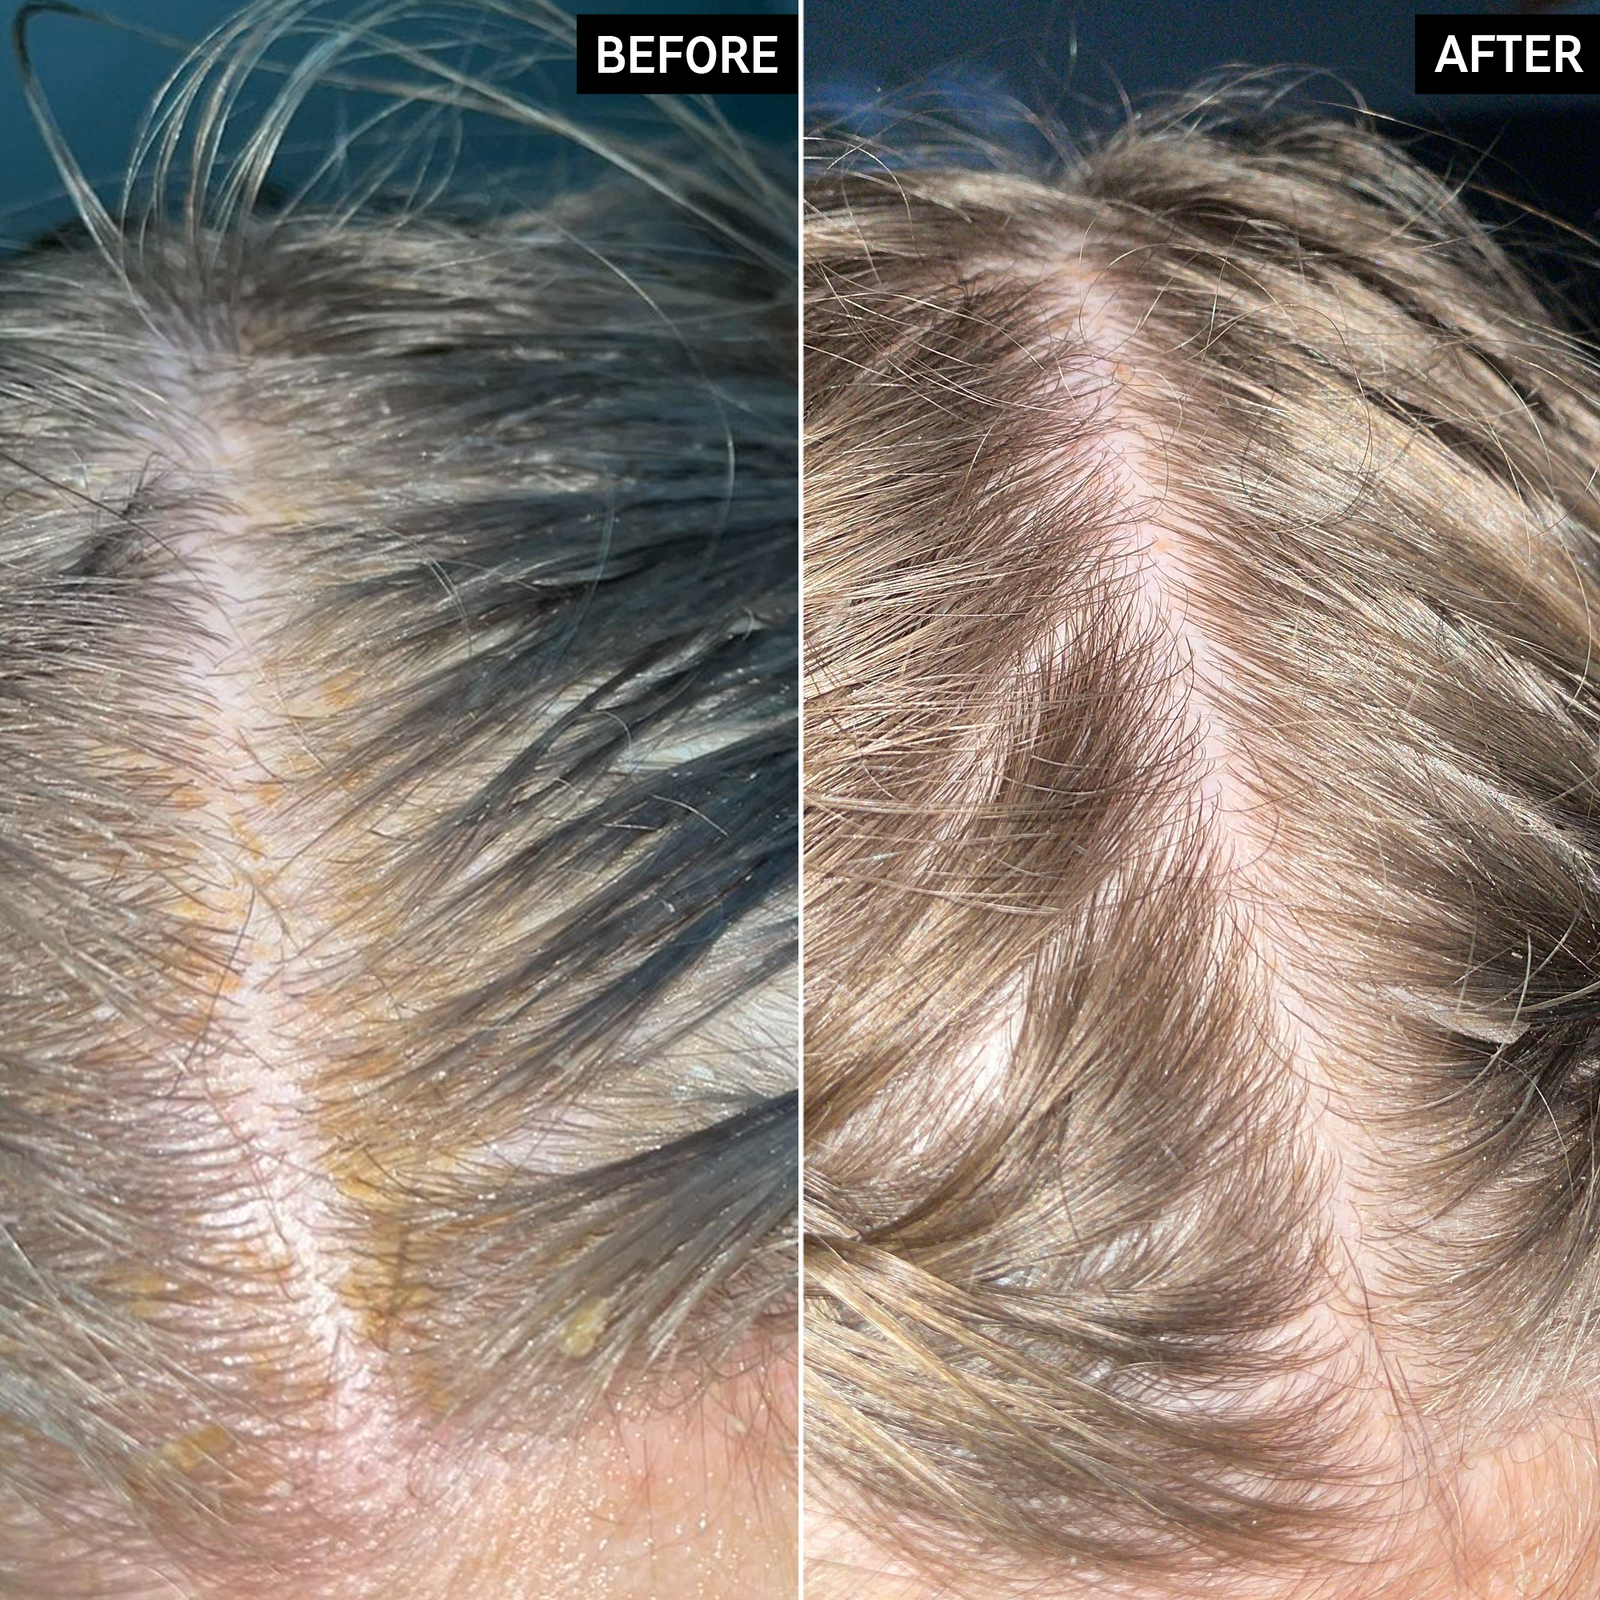 Two images of a scalp and hair side by side to show before and after using Salicylic Acid Exfoliating Scalp Treatment for 6 weeks